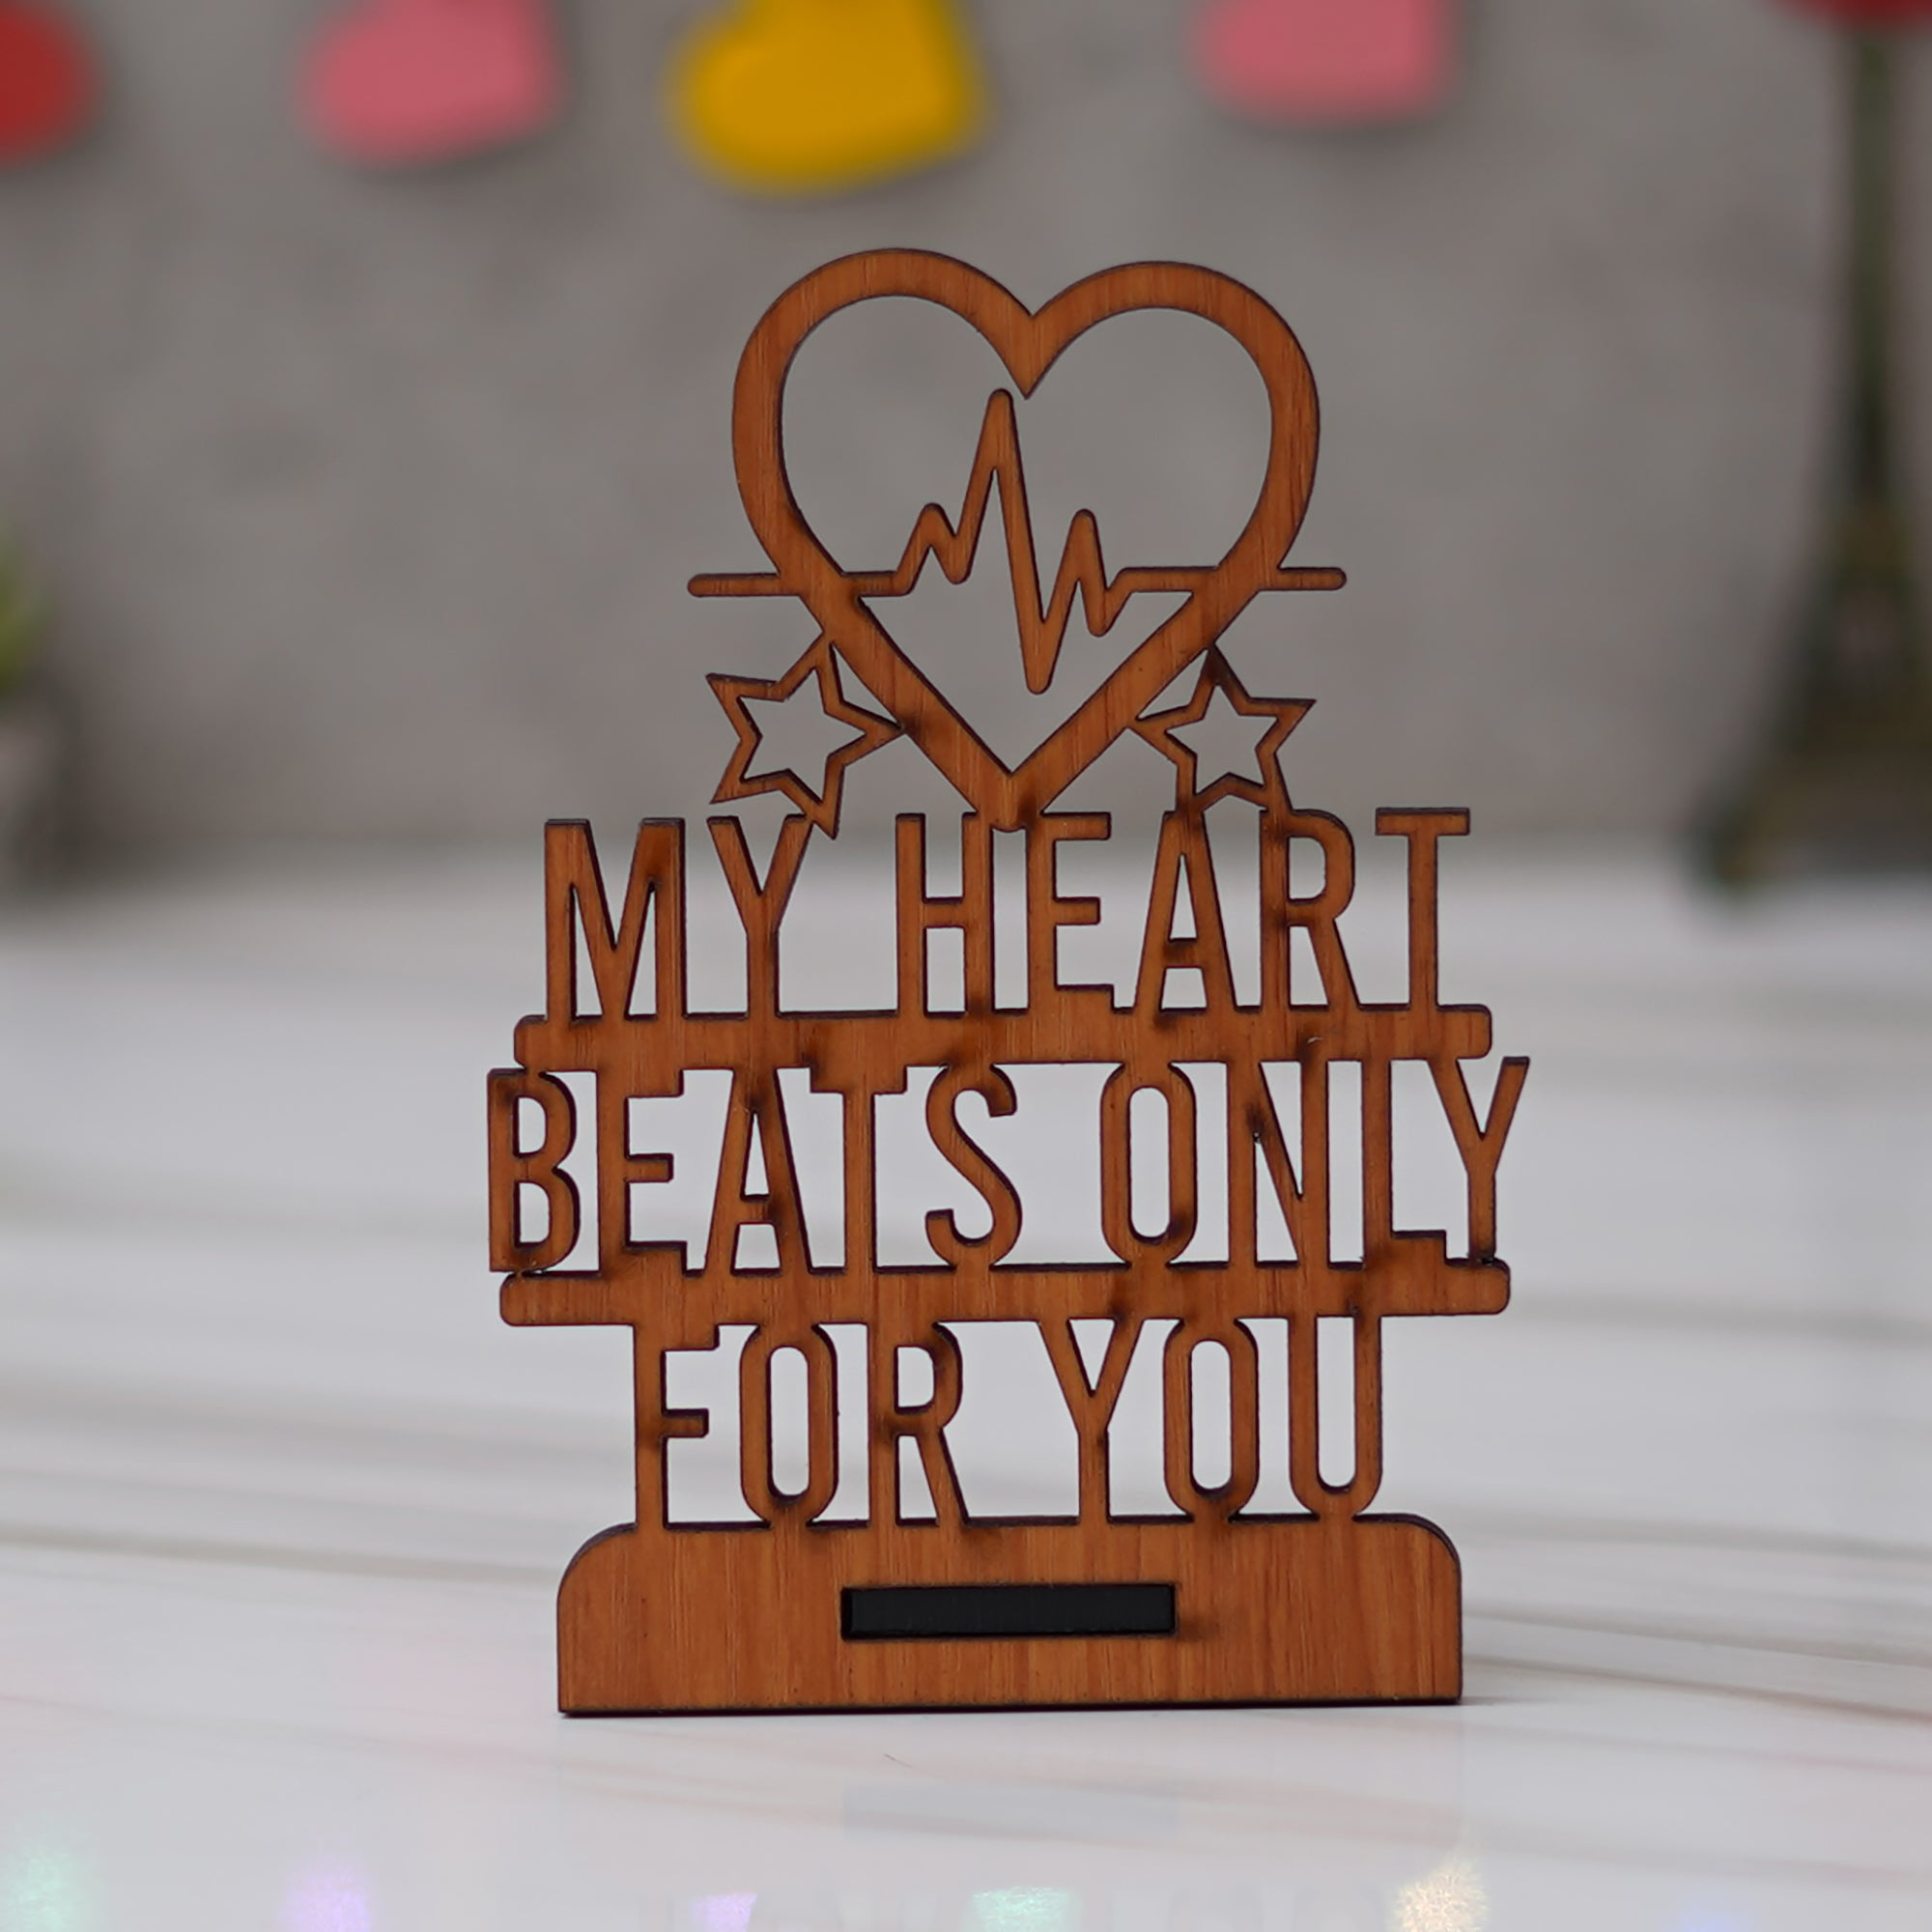 Valentine Combo of Golden Red Rose Gift Set, "My Heart Beats Only For You" Wooden Showpiece With Stand, Bride Kissing Groom Romantic Polyresin Decorative Showpiece 3